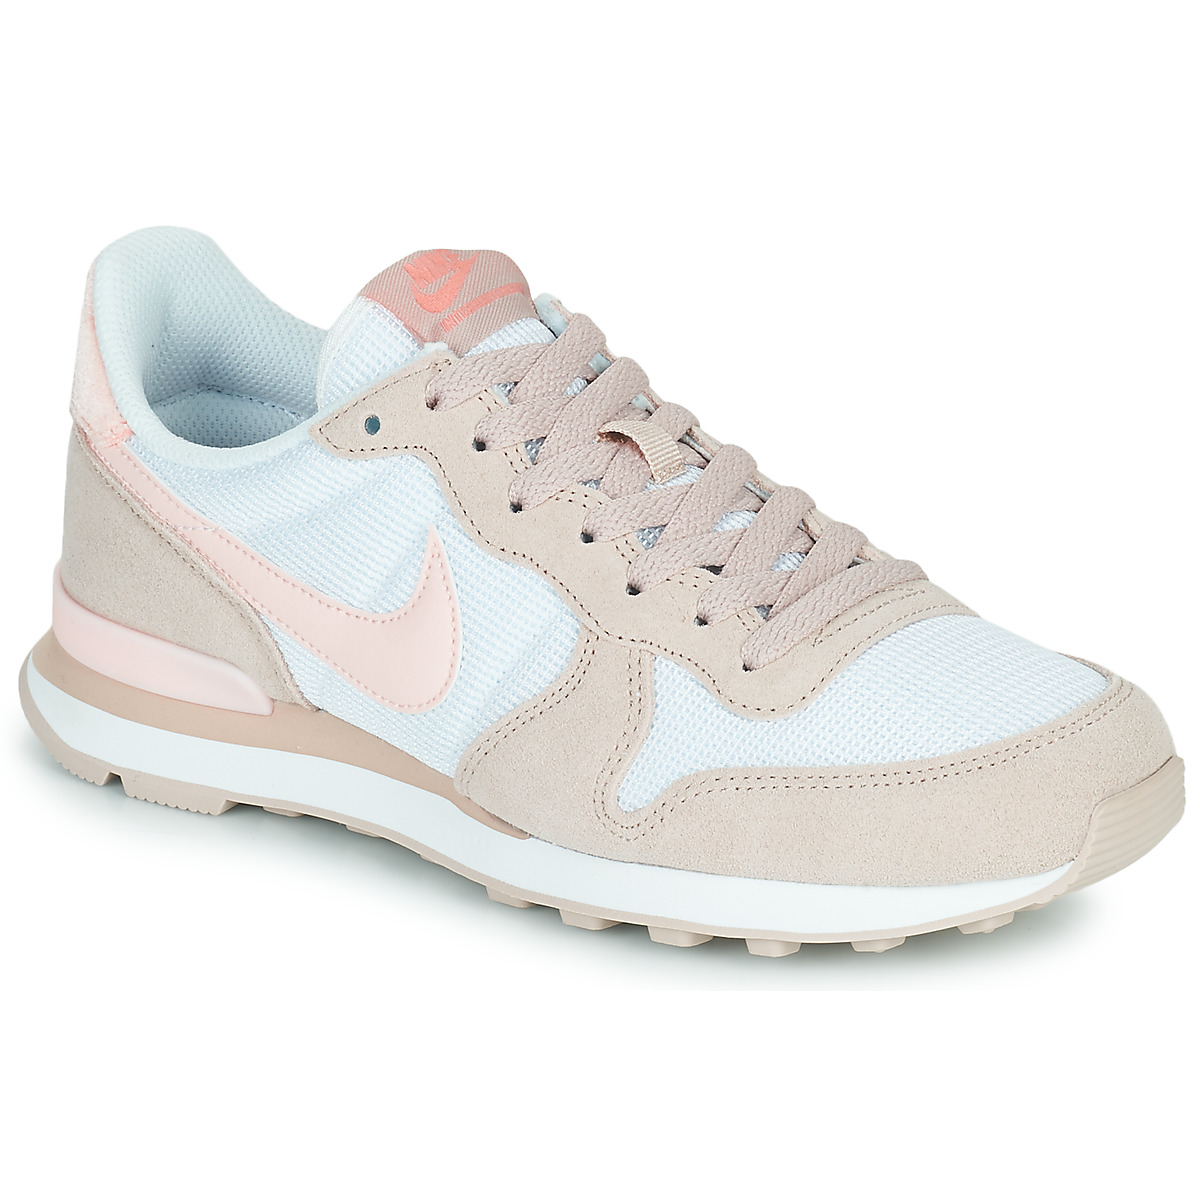 Gran roble Chillido A la verdad Nike W NIKE INTERNATIONALIST MN White / Pink - Free delivery | Spartoo NET  ! - Shoes Low top trainers Women USD/$102.00